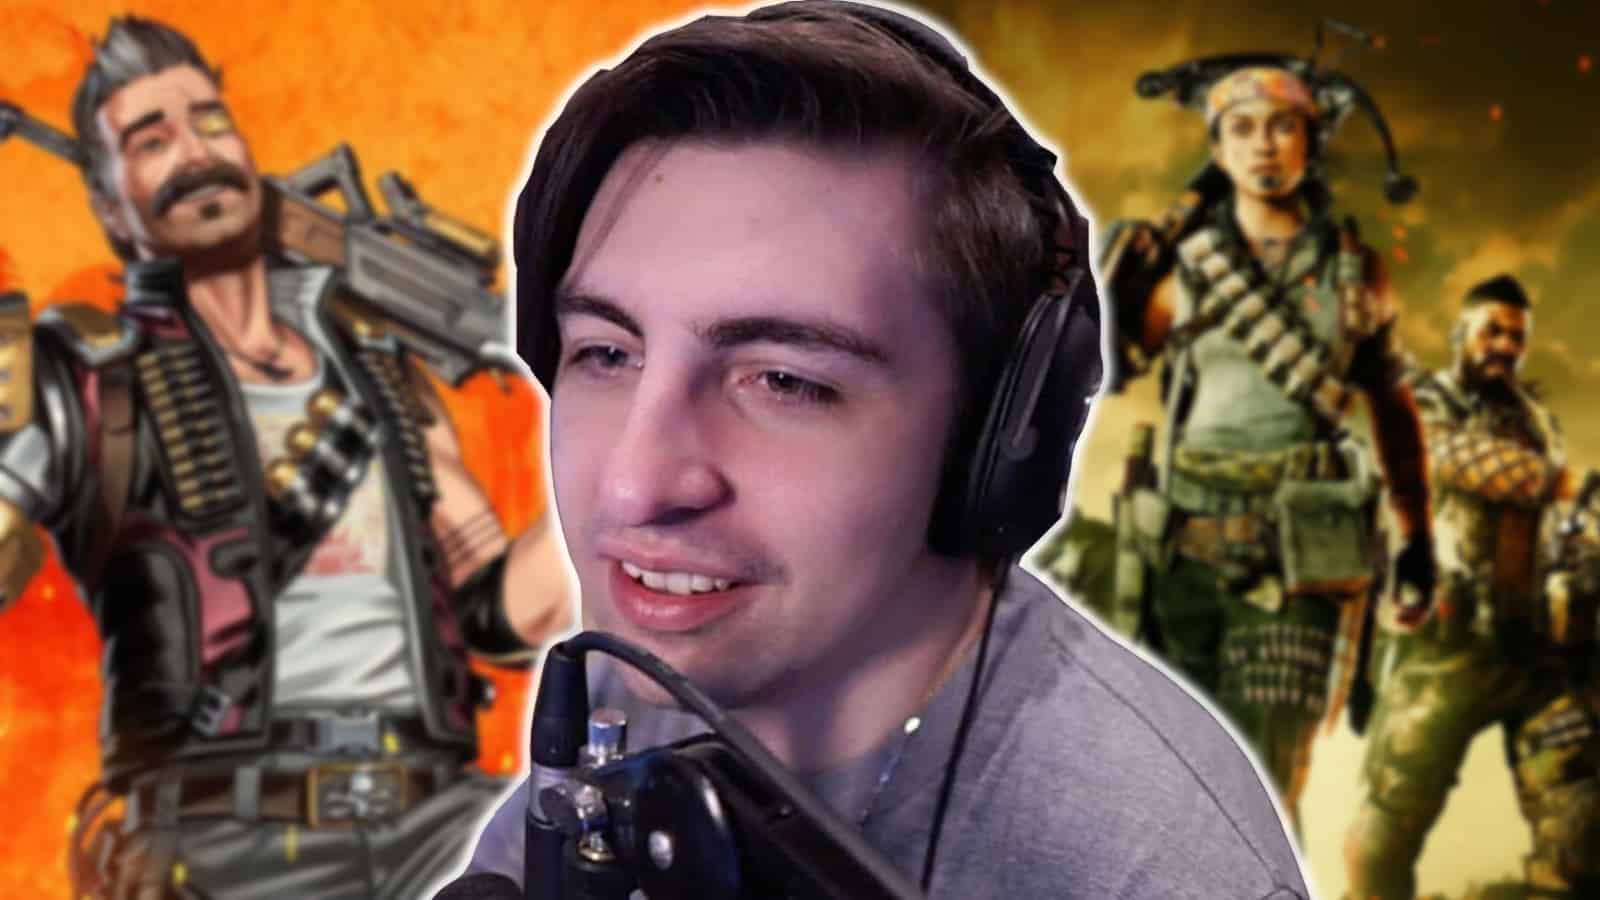 An image of Twitch streamer Shroud